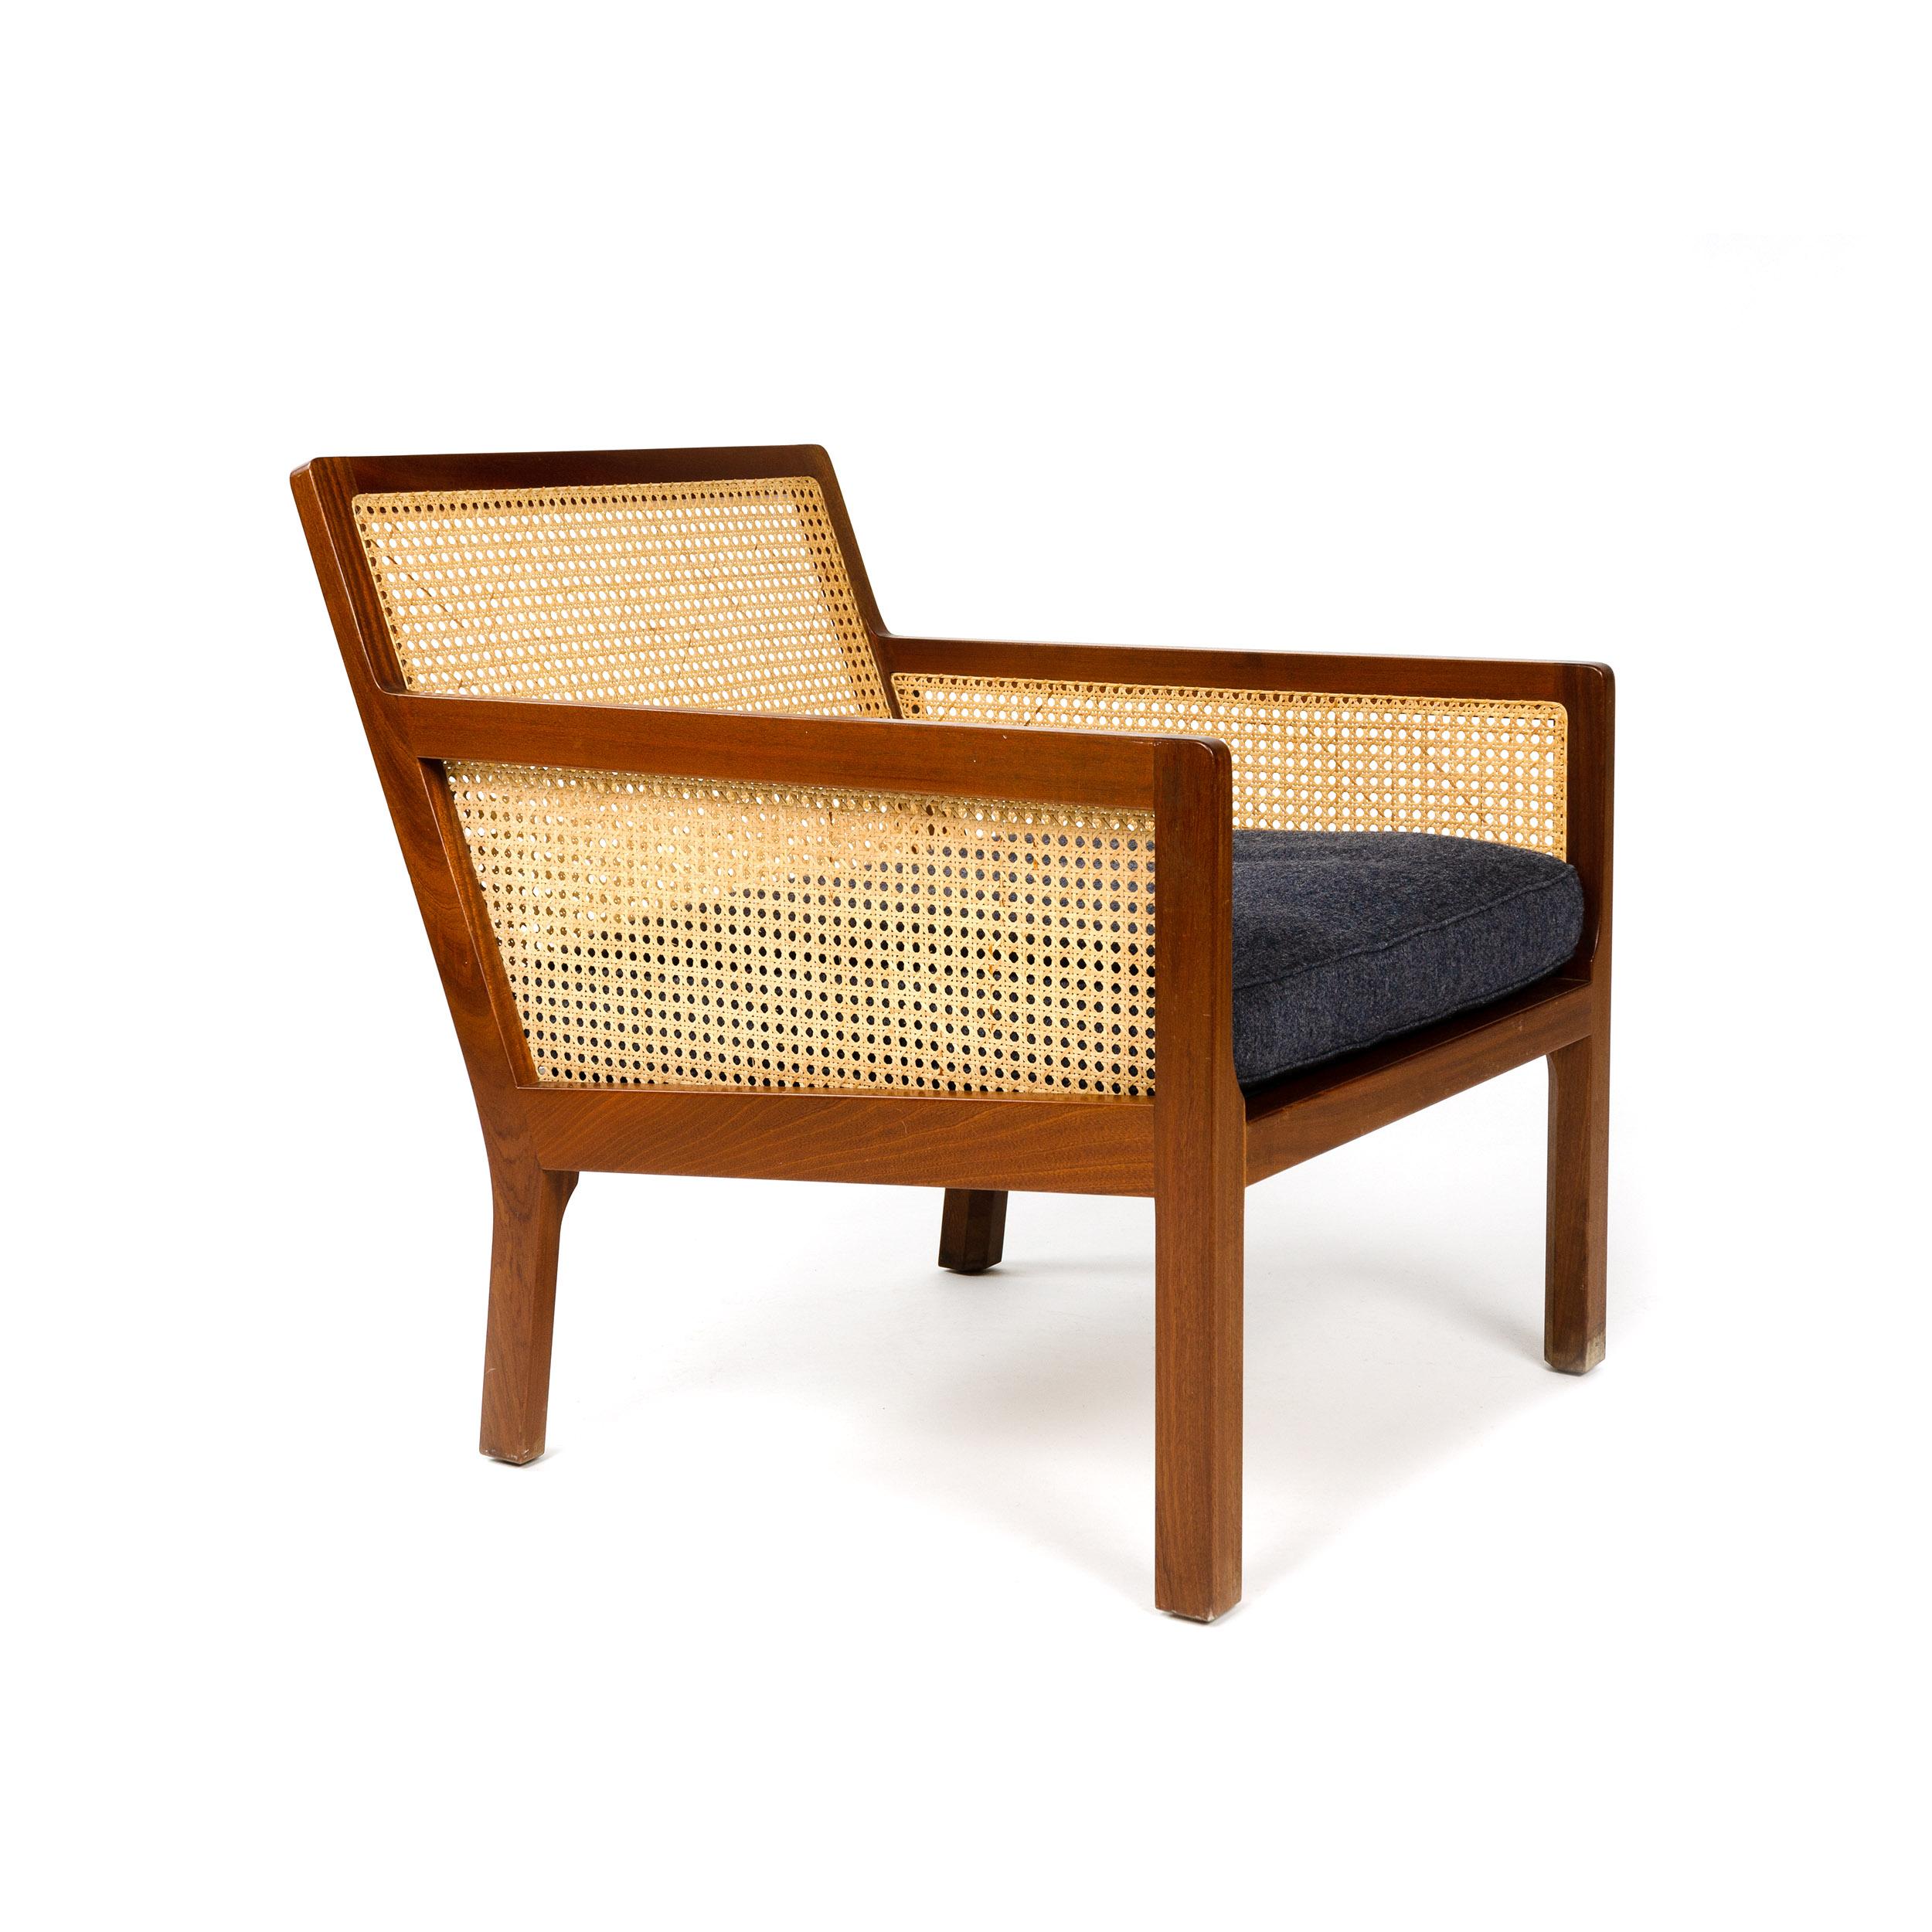 Mid-20th Century Caned Lounge Chair by Bernt Petersen for Worts Mobelsnedkeri For Sale